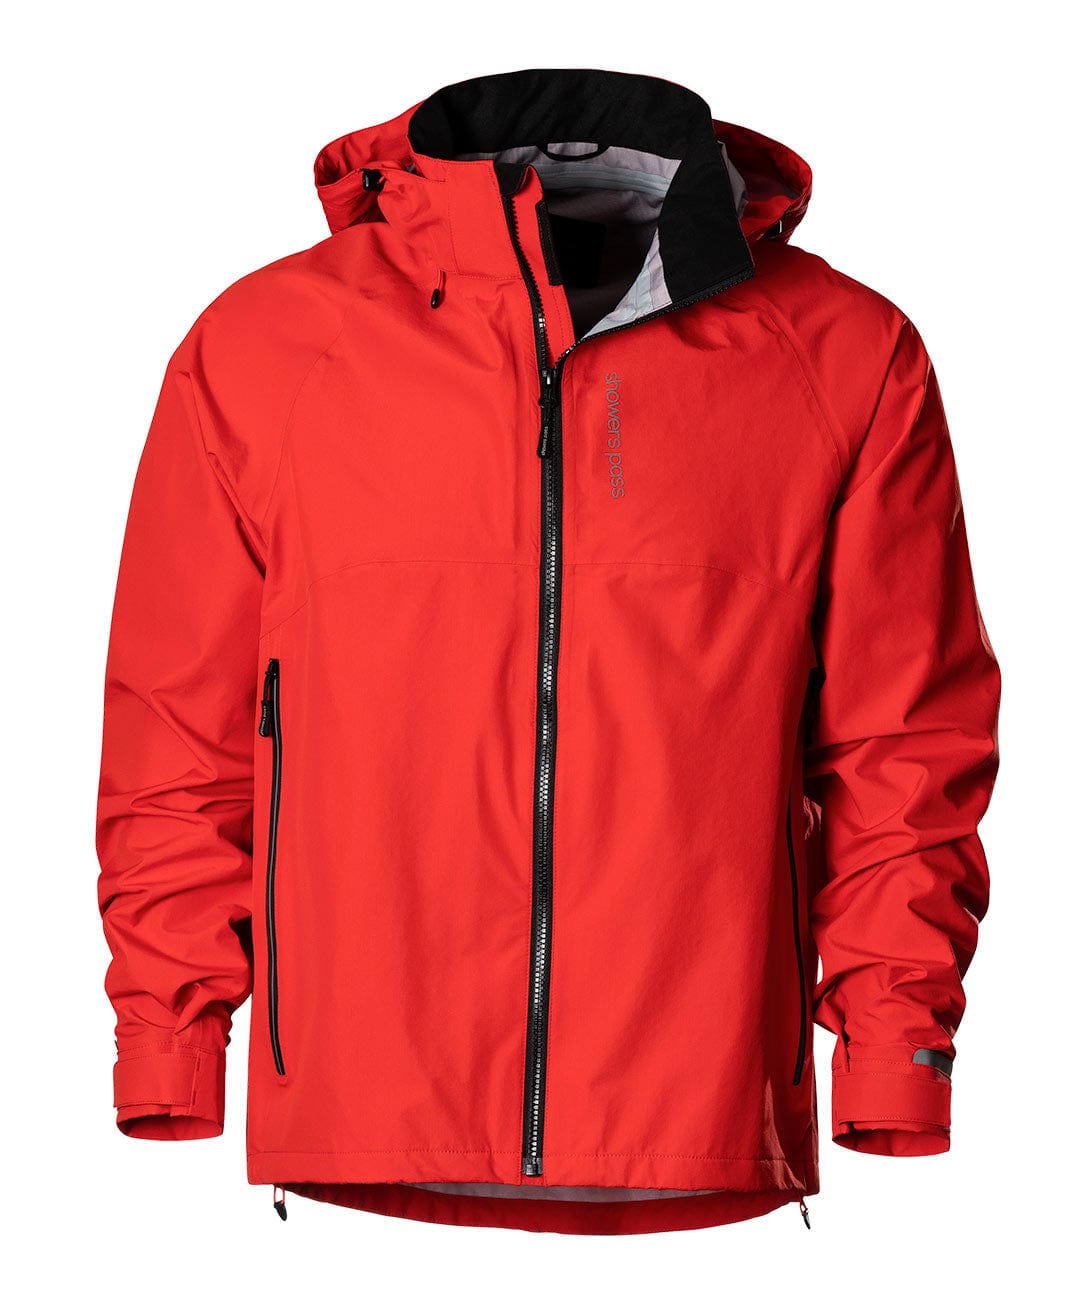 Hiking Outerwear - Jackets